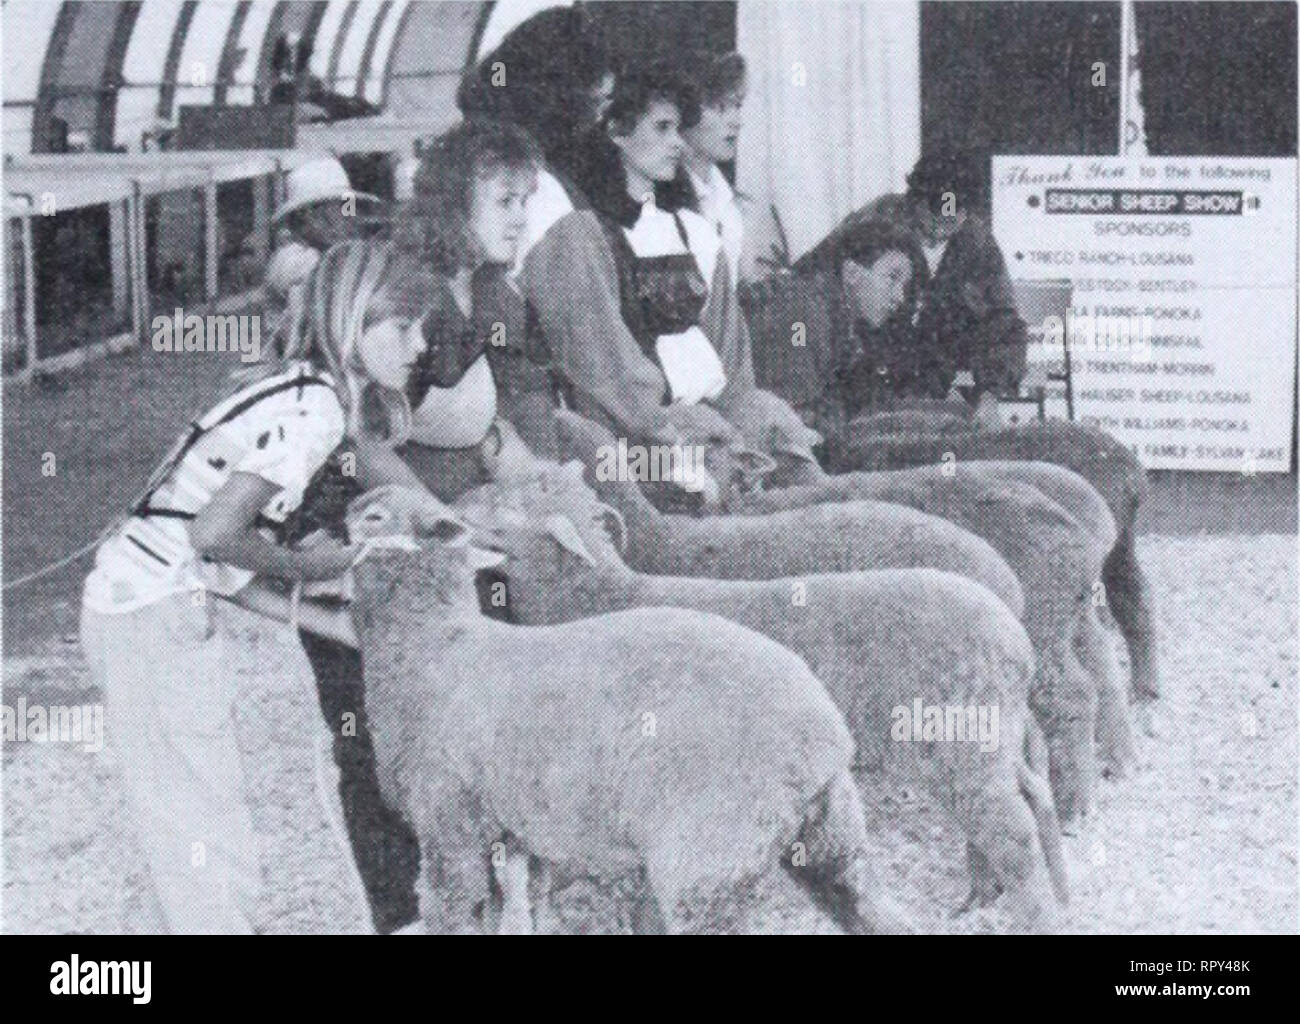 . Agri-news. Agriculture. August 6. 1990 For immediate release 4-H sheep clubs featured at showcase Sixteen Alberta 4-H sheep club members had a busy two days in Red Deer during Sheep Showcase'90. The members worked with 60 head of sheep in a variety of classes including trimming, judging, showmanship and conformation. Tina Young of the Crowfoot Beef and Sheep Club exhibited both the supreme champion market and wool ewes at the show. Along the way she garnered top spot in the yearling ewe class with her Dorset and wool yearling ewe with her Ramboulette. Young also earned first place in the int Stock Photo